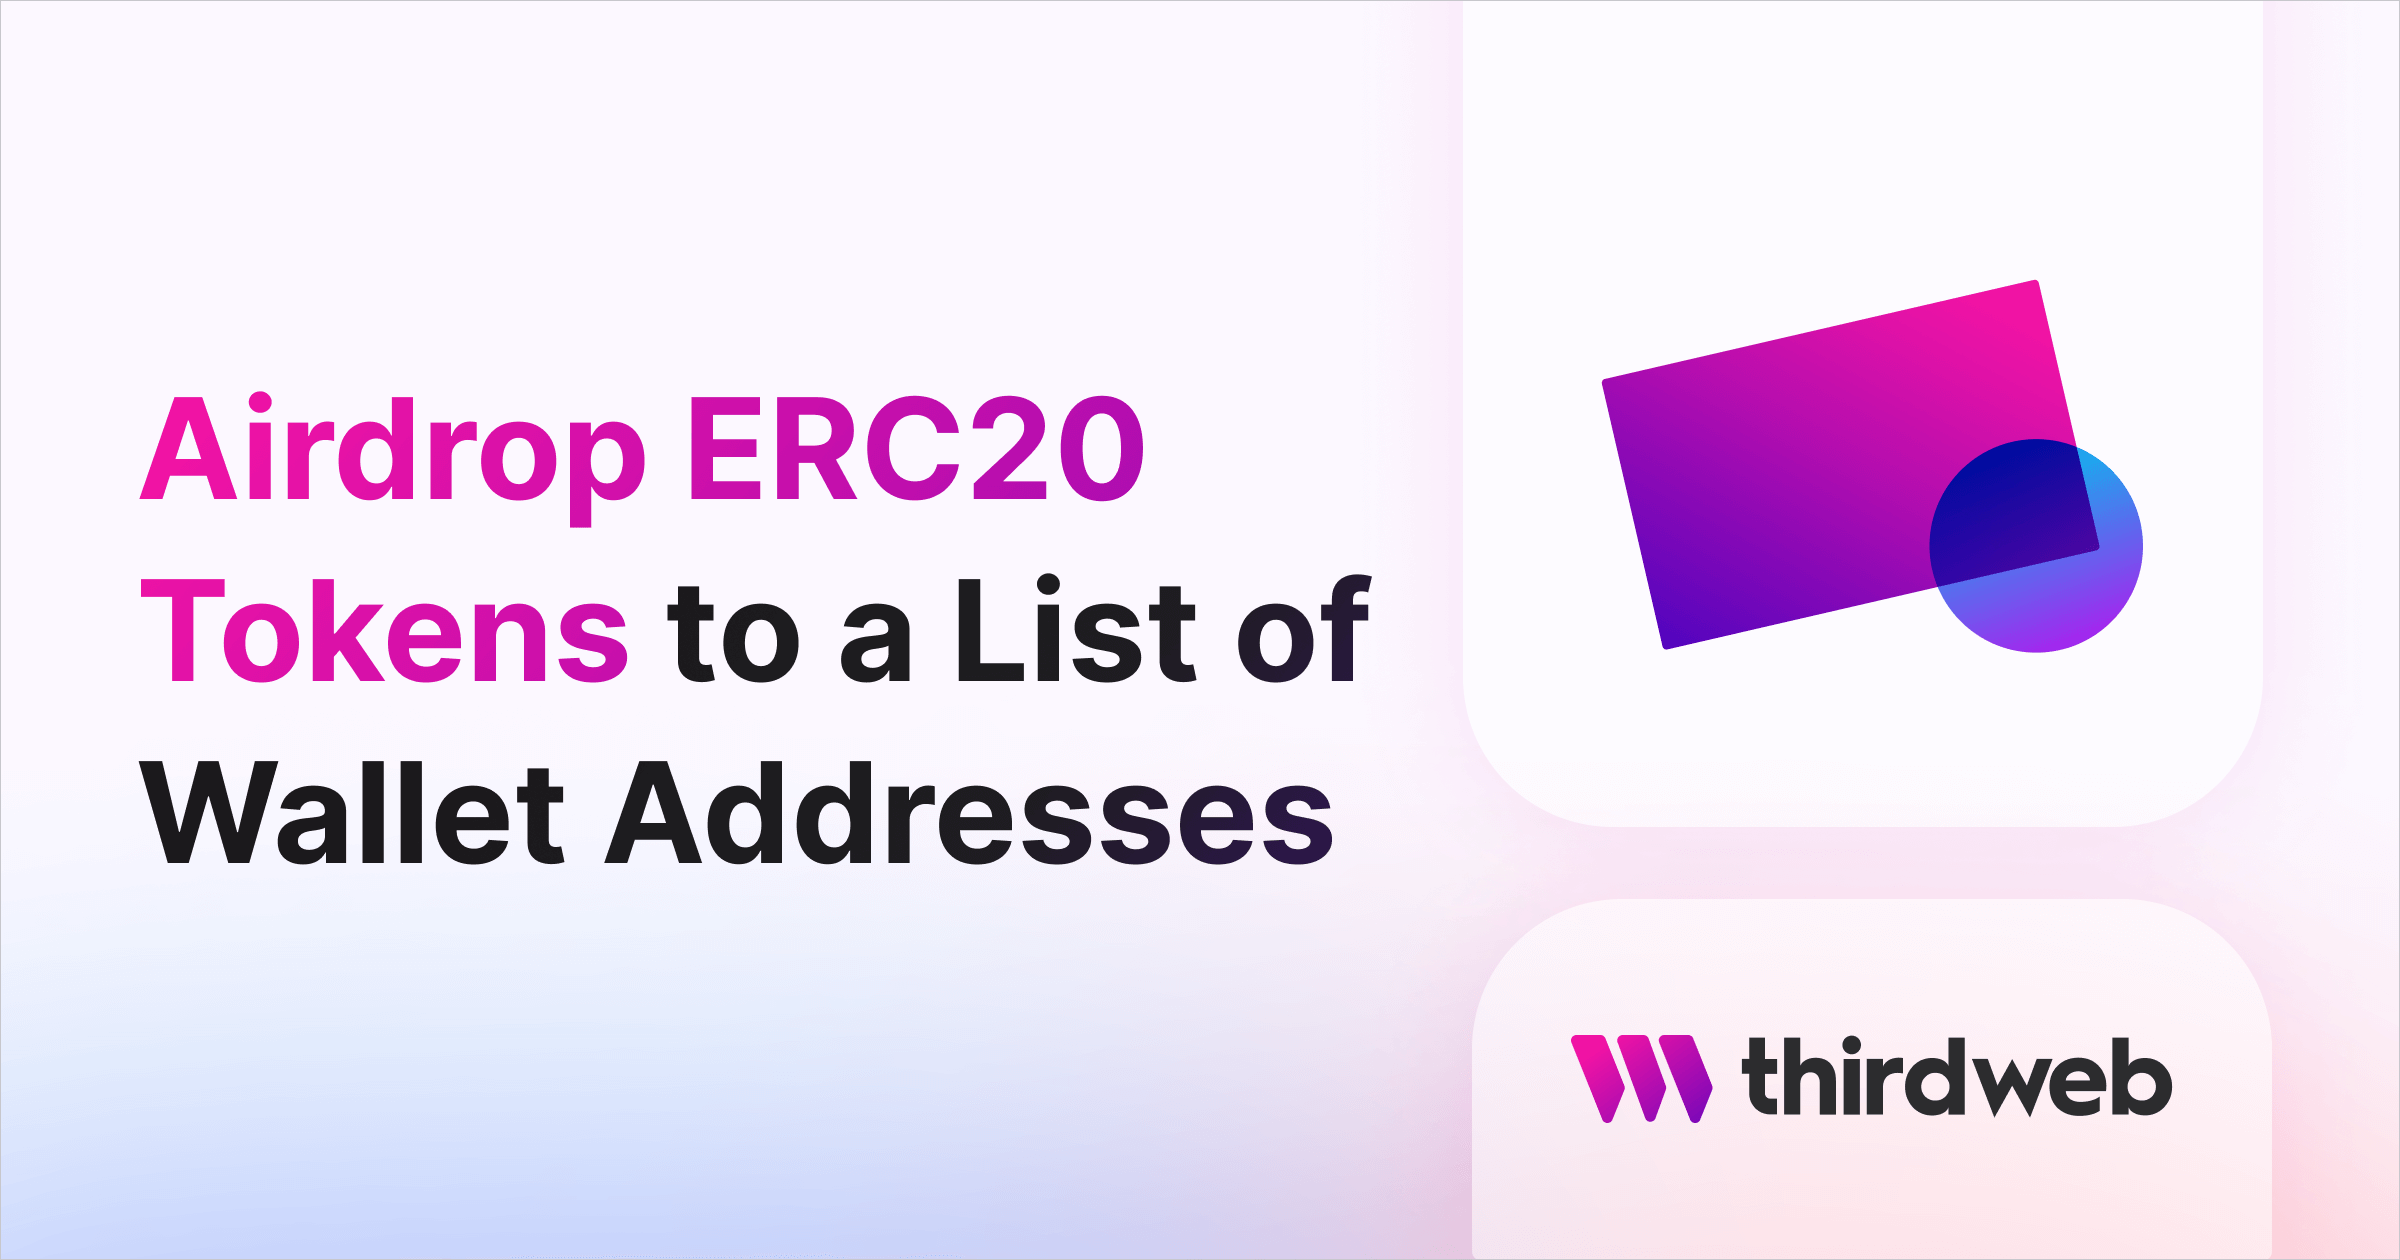 Airdrop ERC20 Tokens to a List of Wallet Addresses - thirdweb Guides